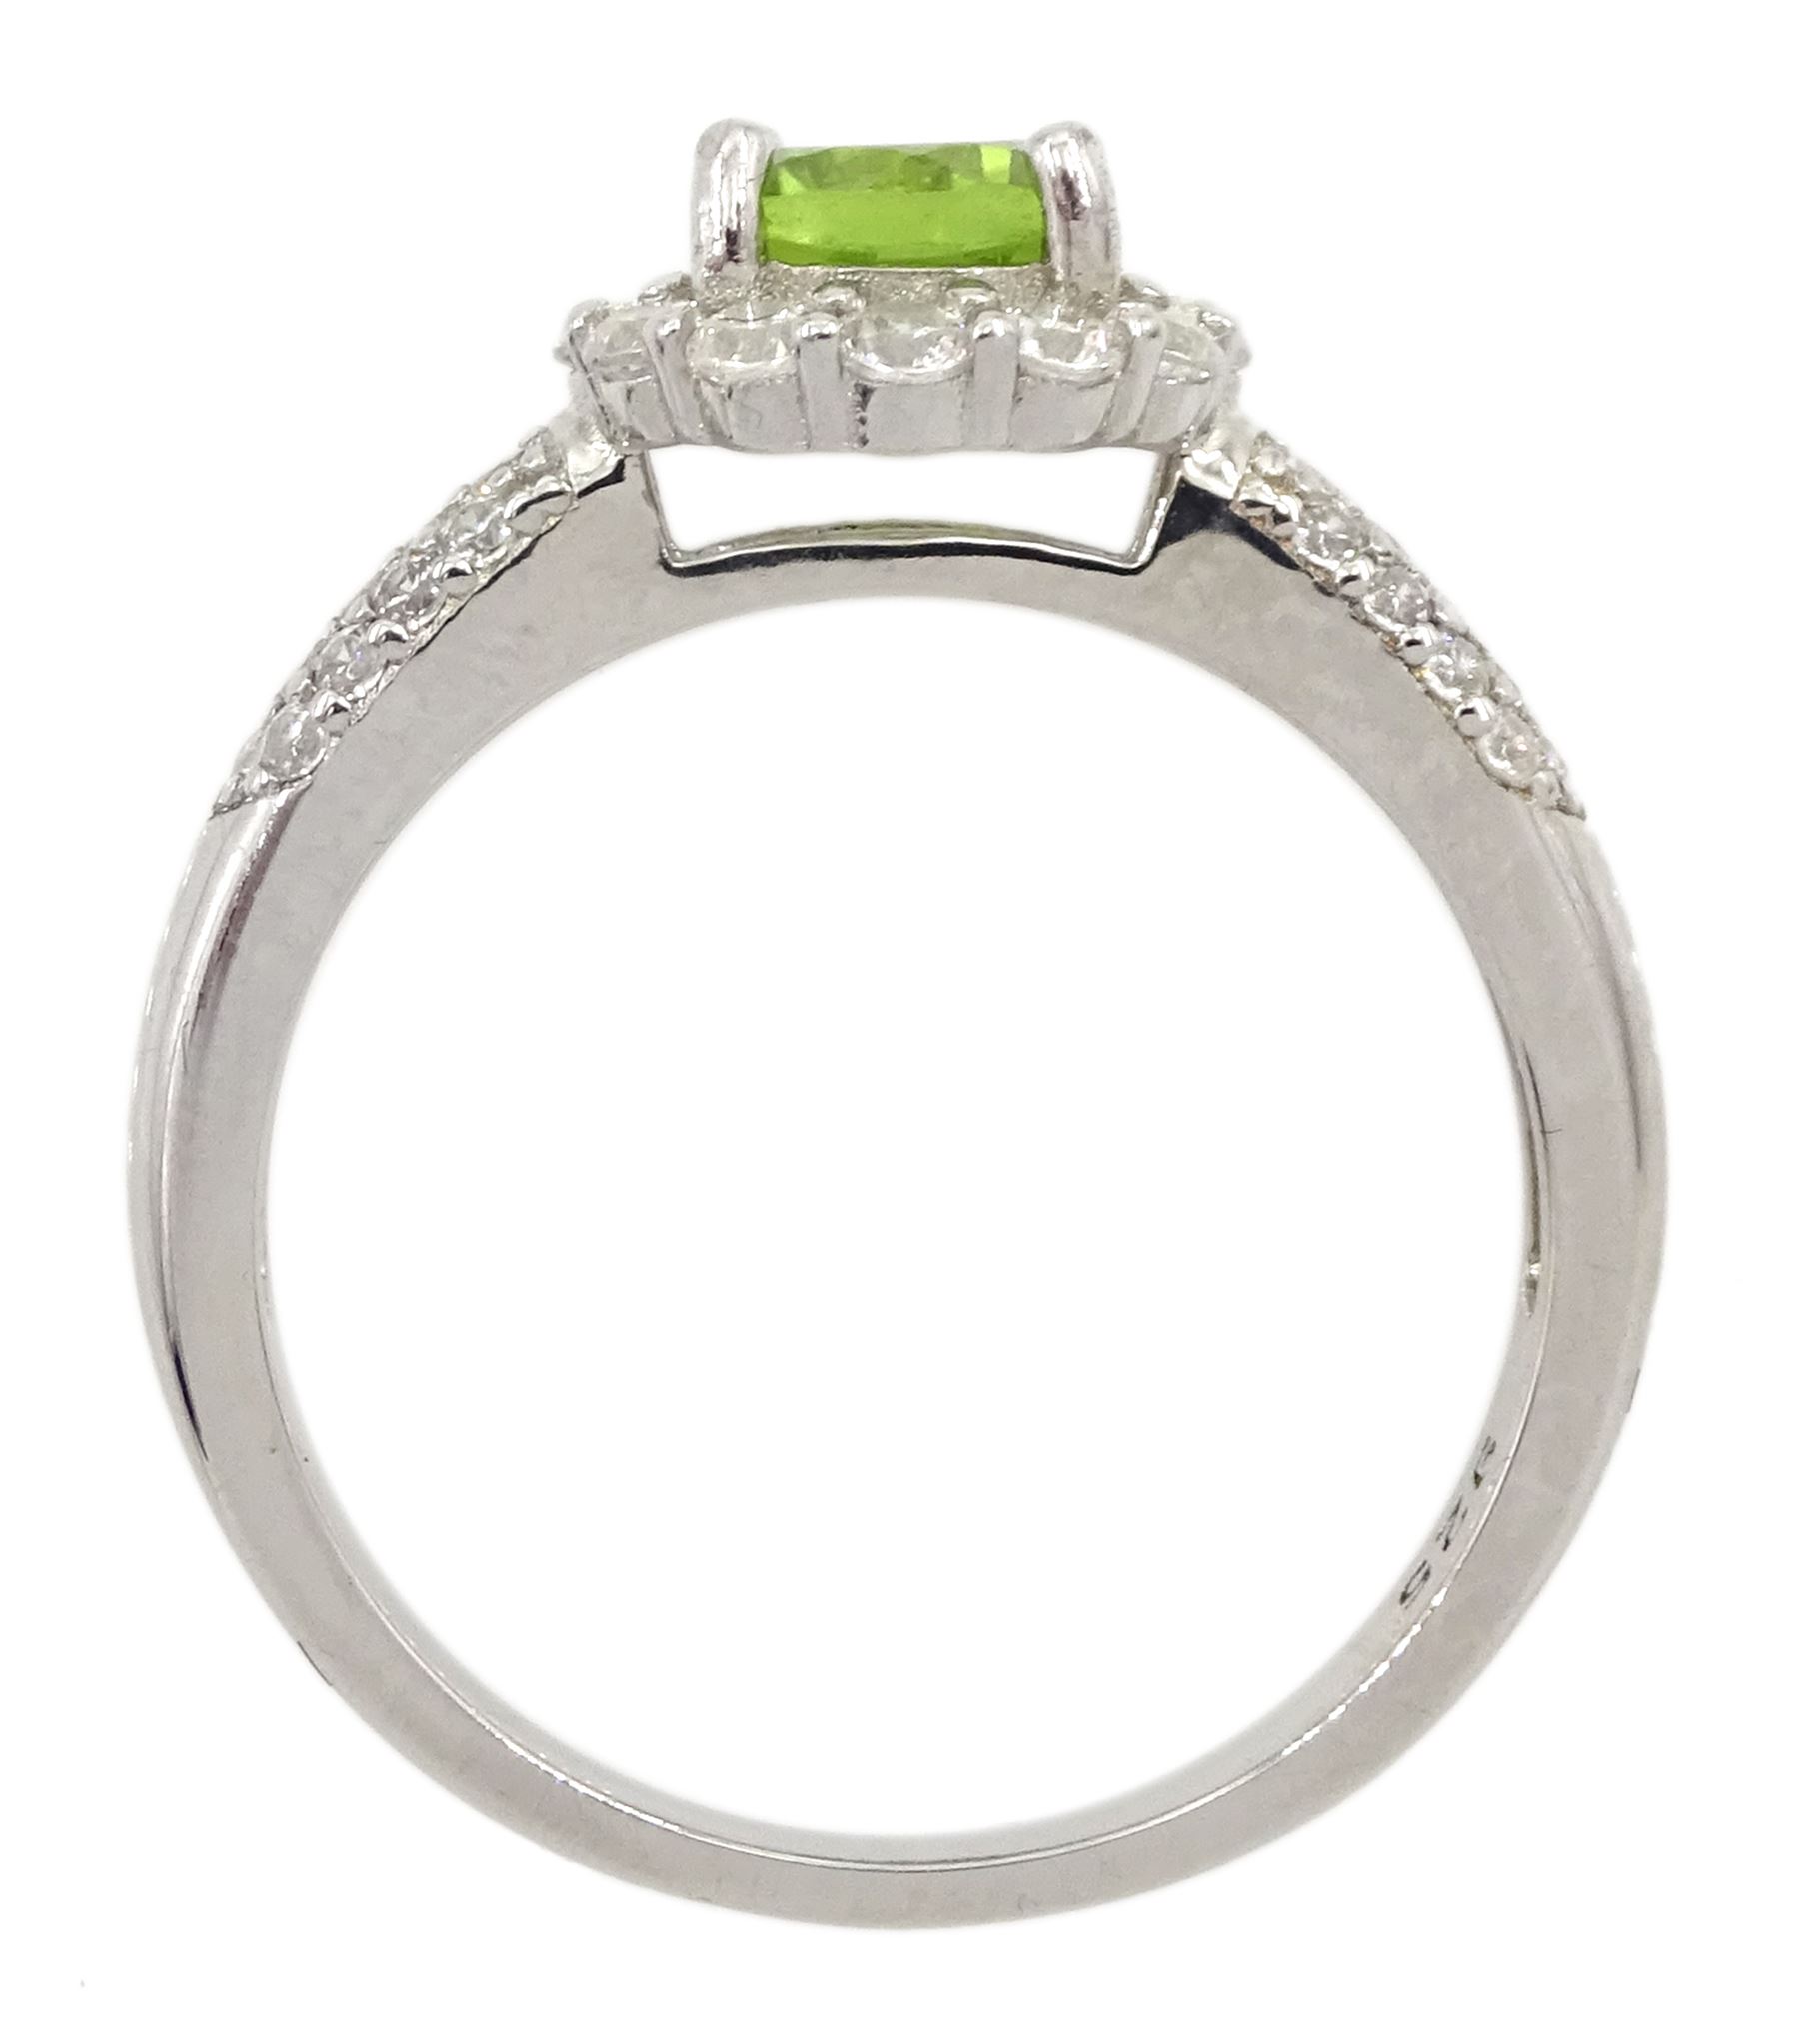 Silver peridot and cubic zirconia cluster ring - Image 4 of 4